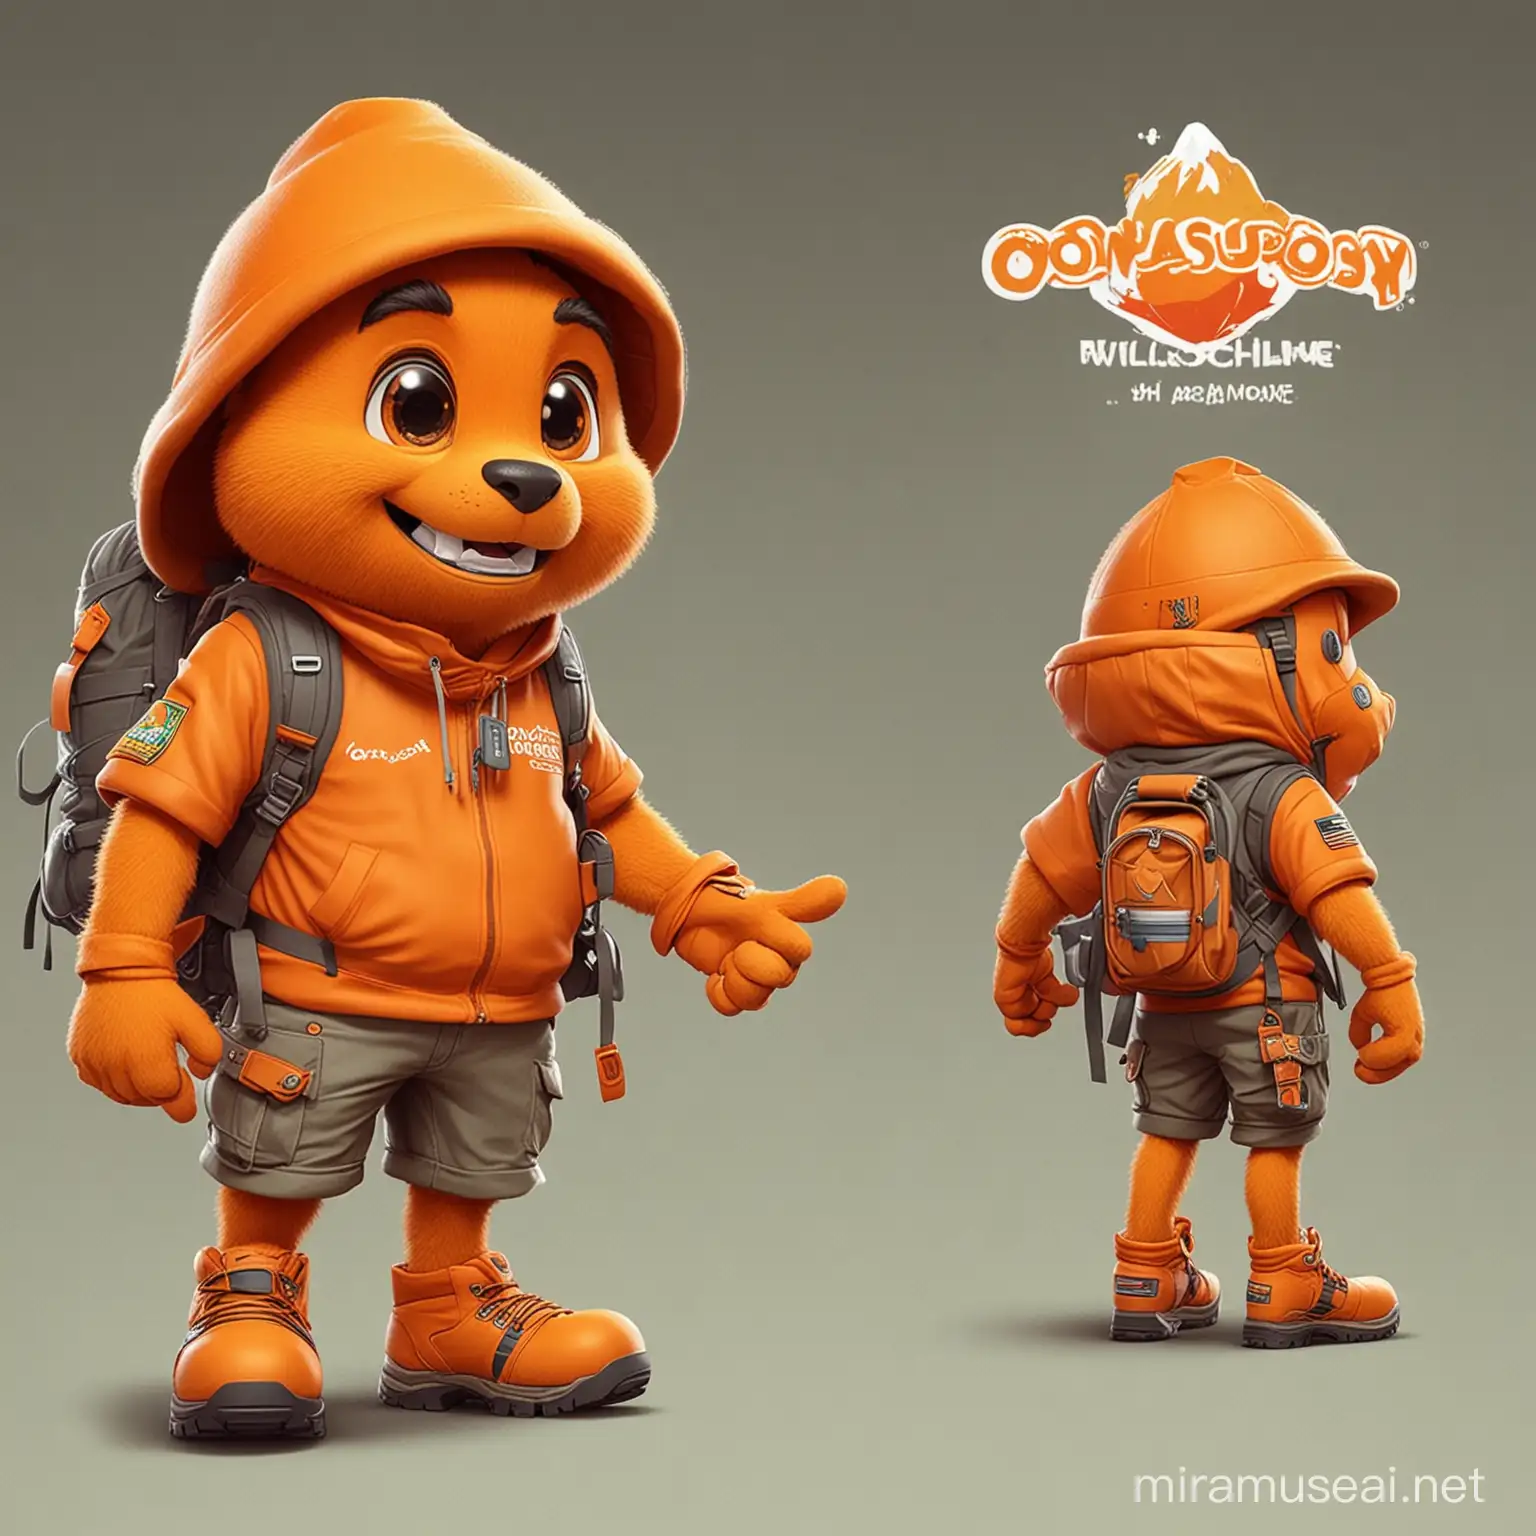 create a fun and cartoonish mascot design. concept is: A Hiking Orange mascot. The title of the design will be 'Orange Odyssey' and 'Panamon Apparel'. Theme: The theme of my brand is "adventure and exploration" Style: The graphic should be cartoonish and fun, 